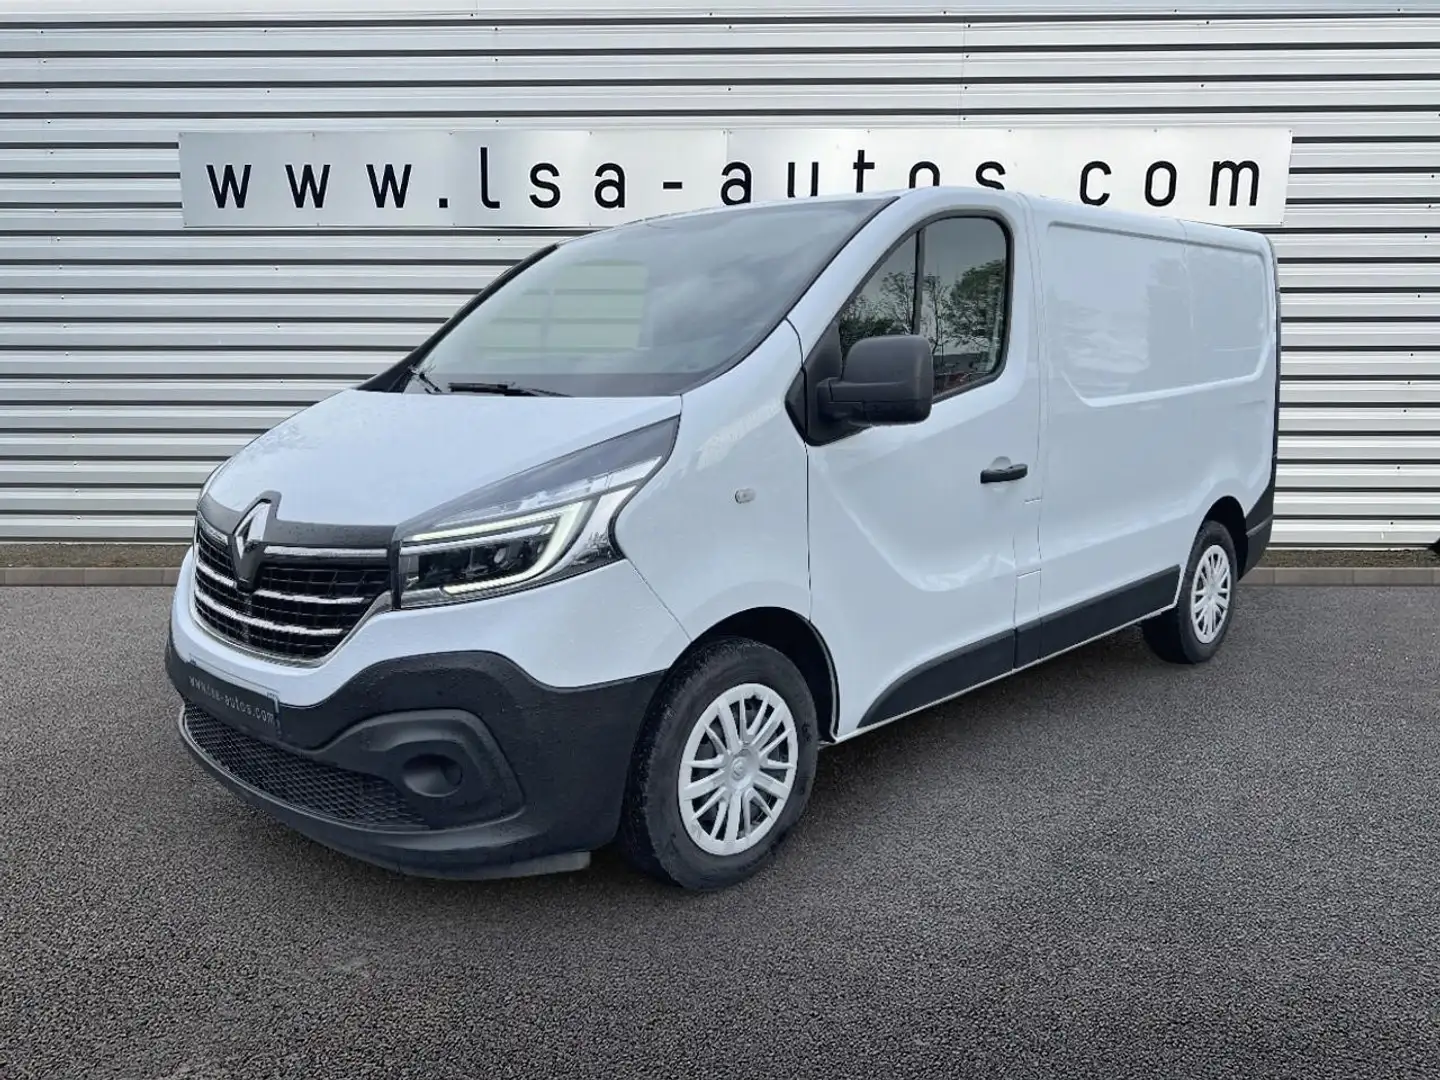 Renault Trafic L1H1 2.0 dCi 120 Fourgon Grand Confort 1000 Kg Blanc - 1